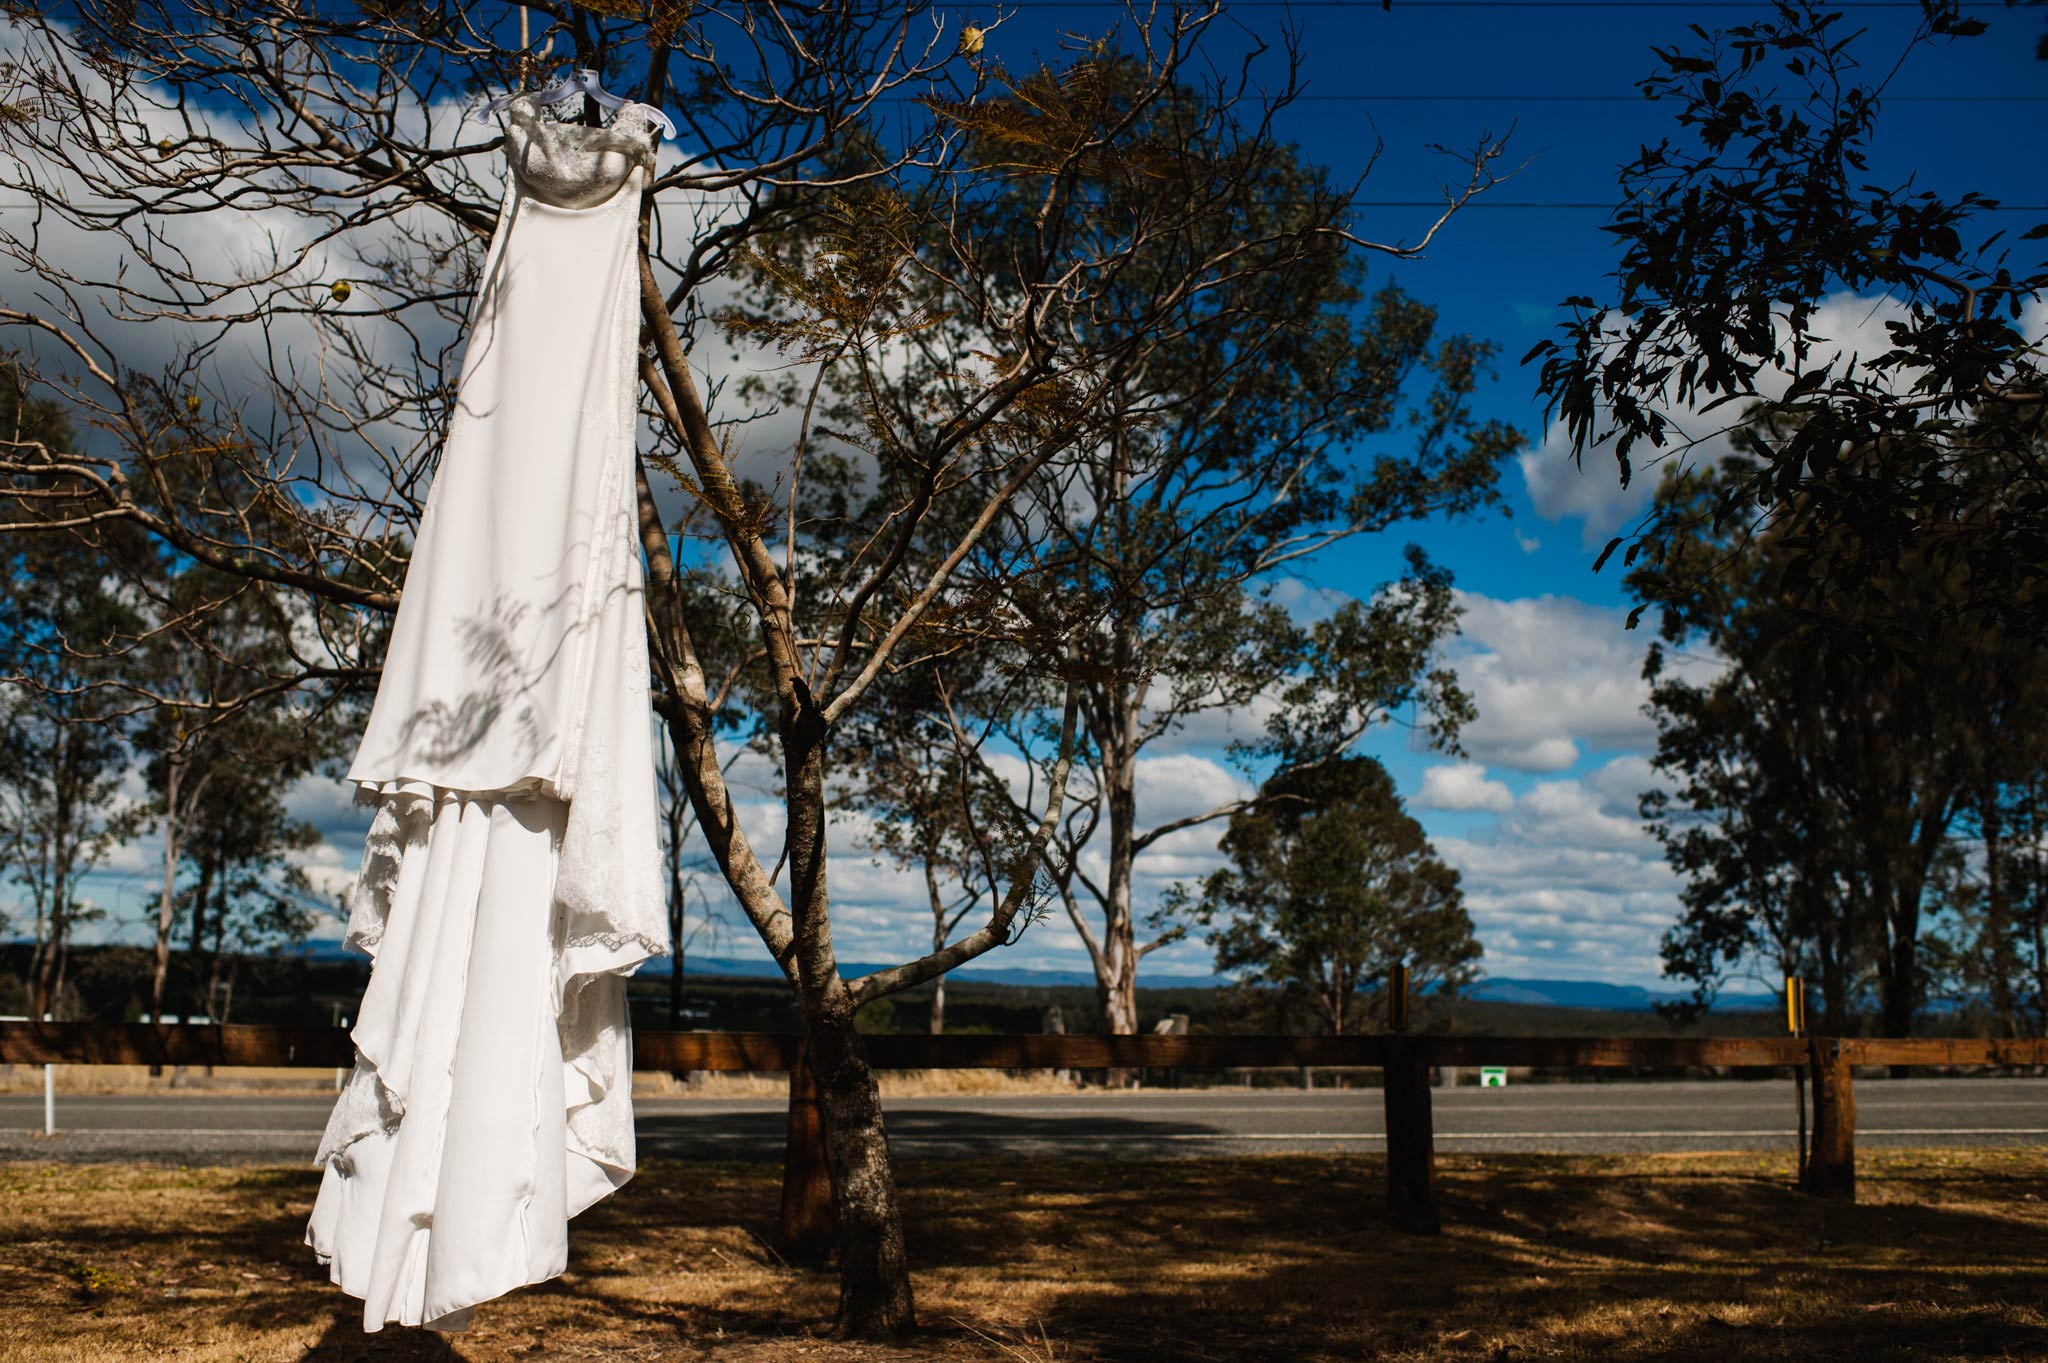 Bridal gown hanging on tree with country view